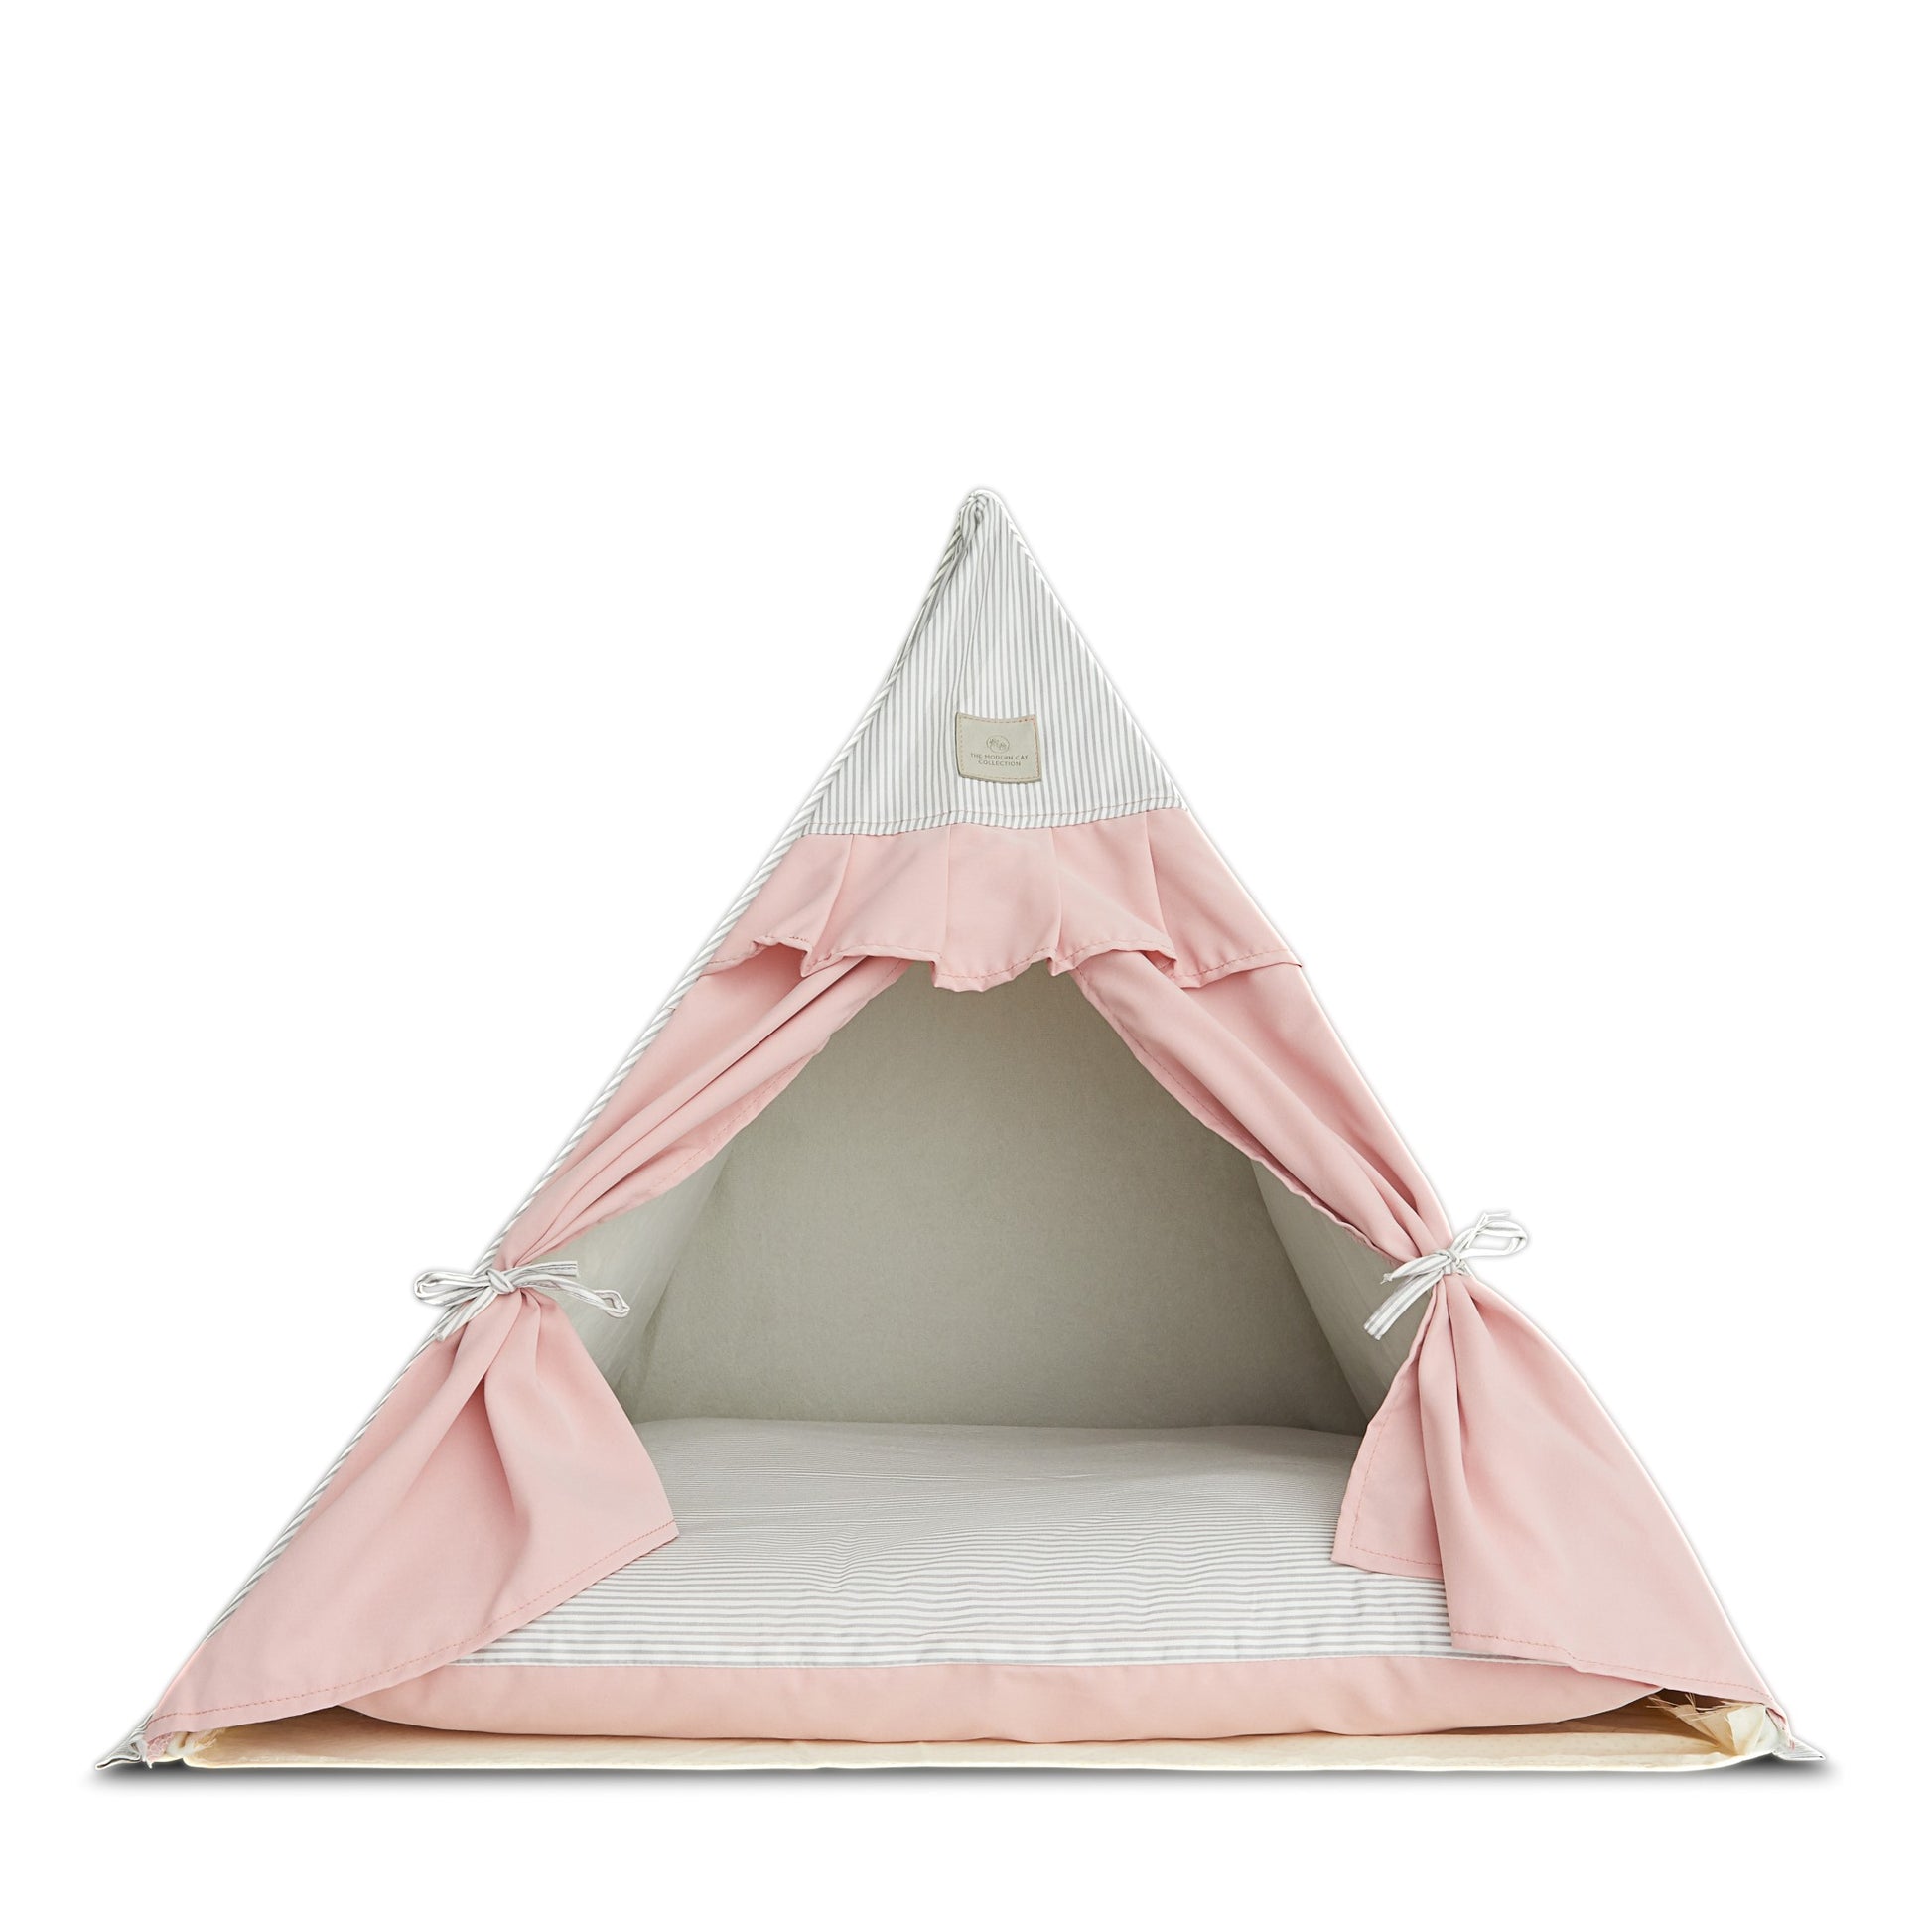 Chatsworth Tent Dog Bed pink and grey. Tie back curtains, cozy cushion, pleated ruffles.